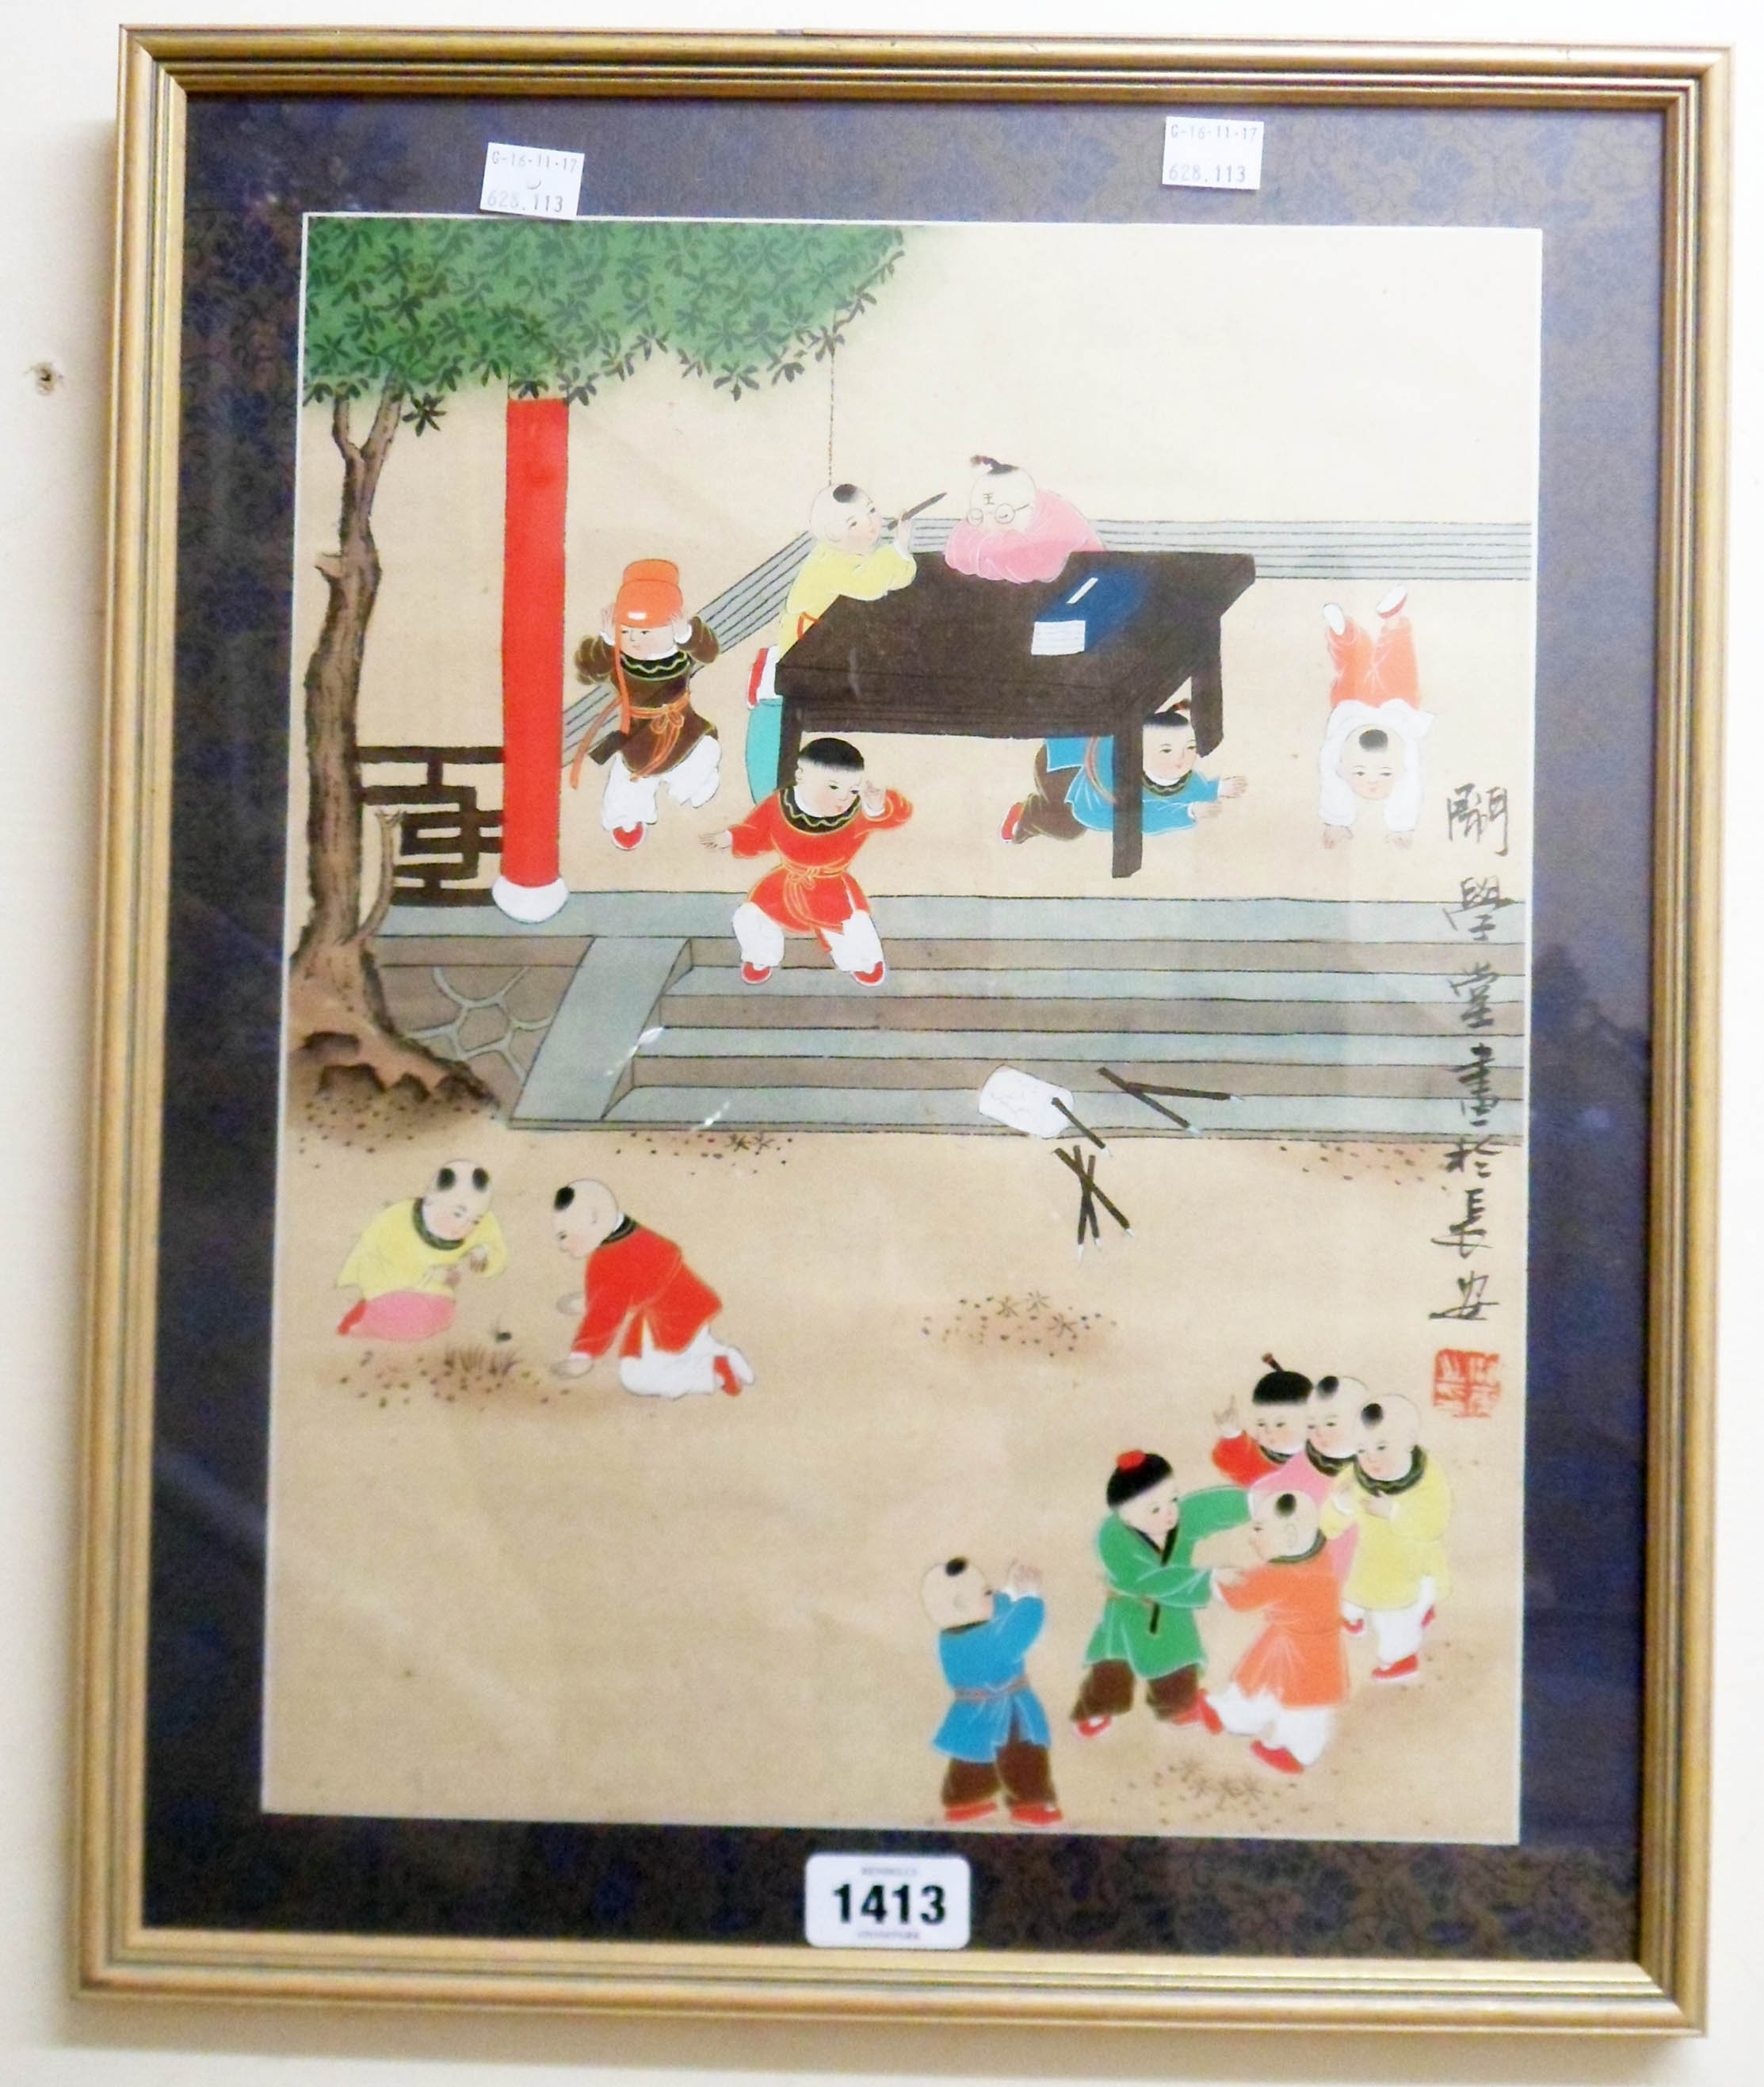 A 20th Century Chinese mixed media picture depicting children at play - text and red seal stamp to